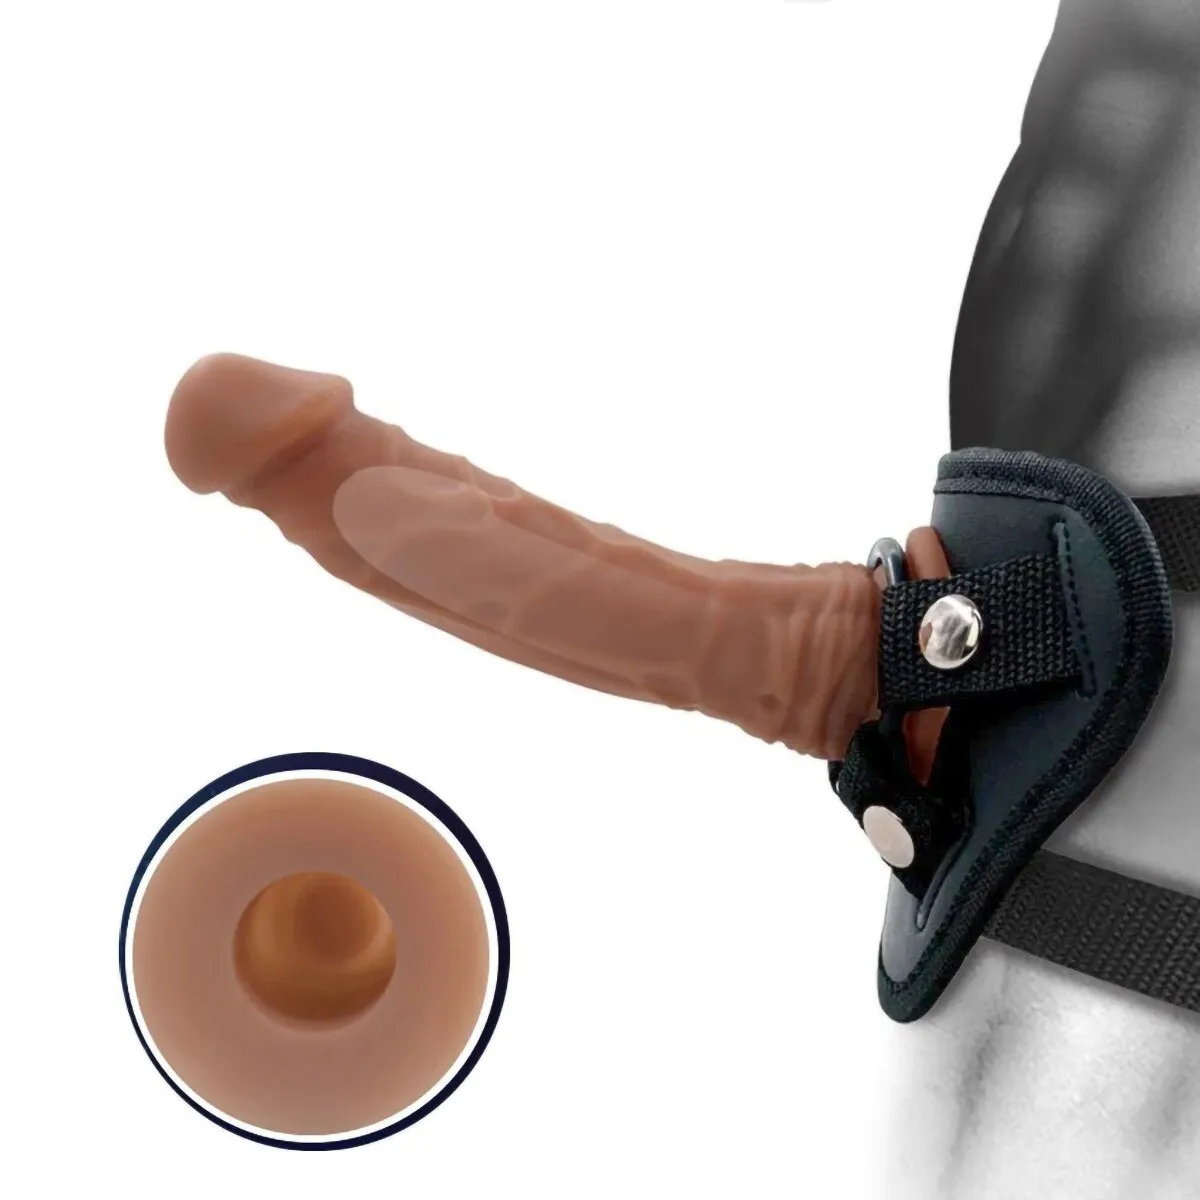 alan kerrison recommends hollow male strap on pic